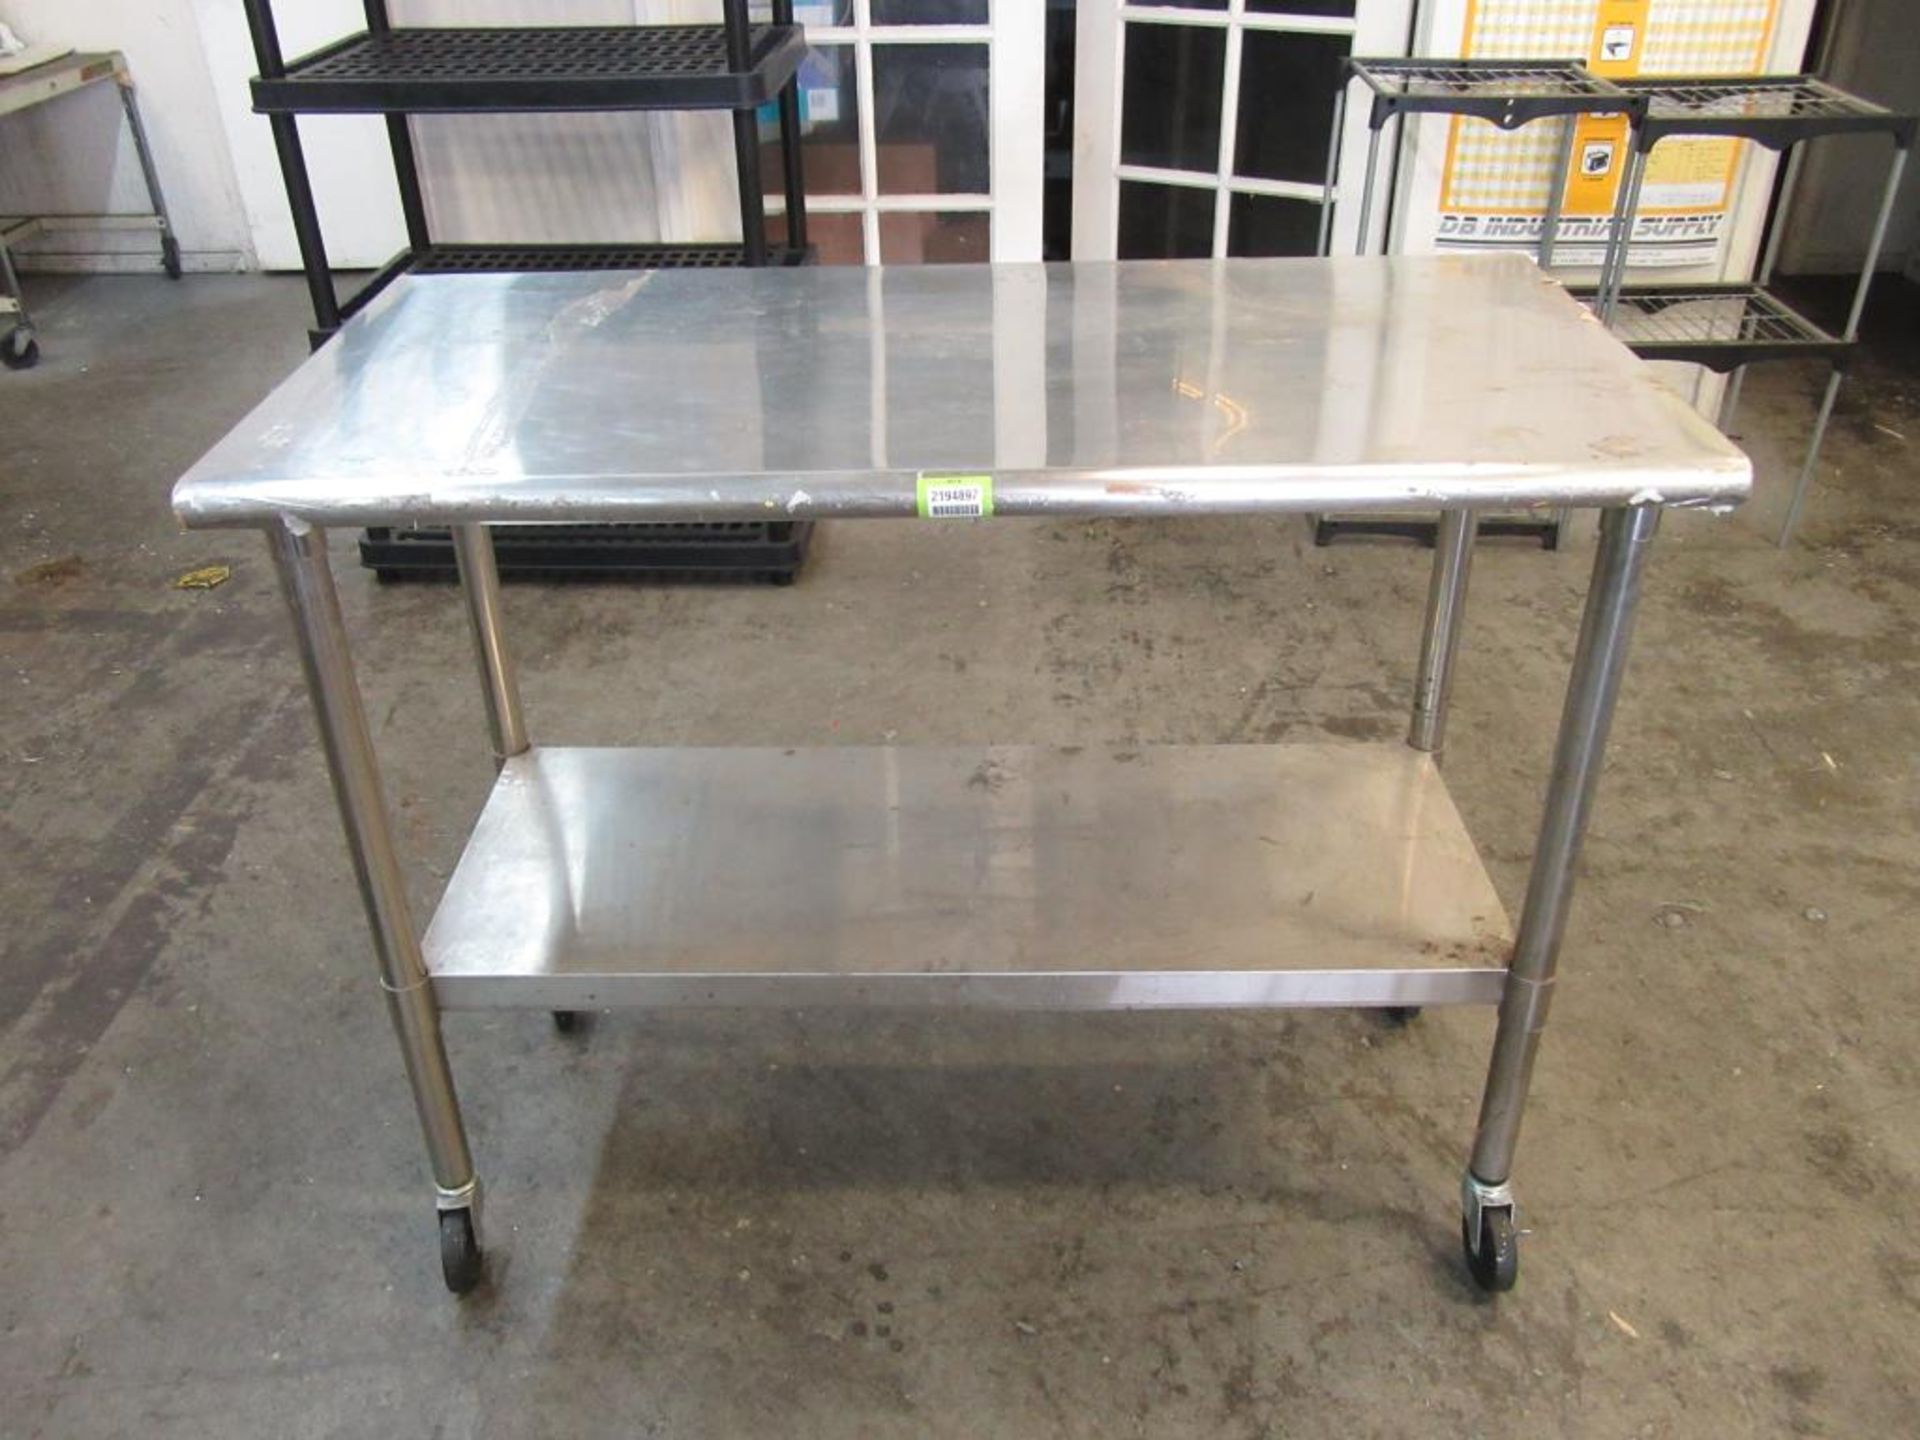 Trinity Stainless Steel Table 48"L x 38"H x 24"W with Bottom Shelf, on Casters. HIT# 2194897.